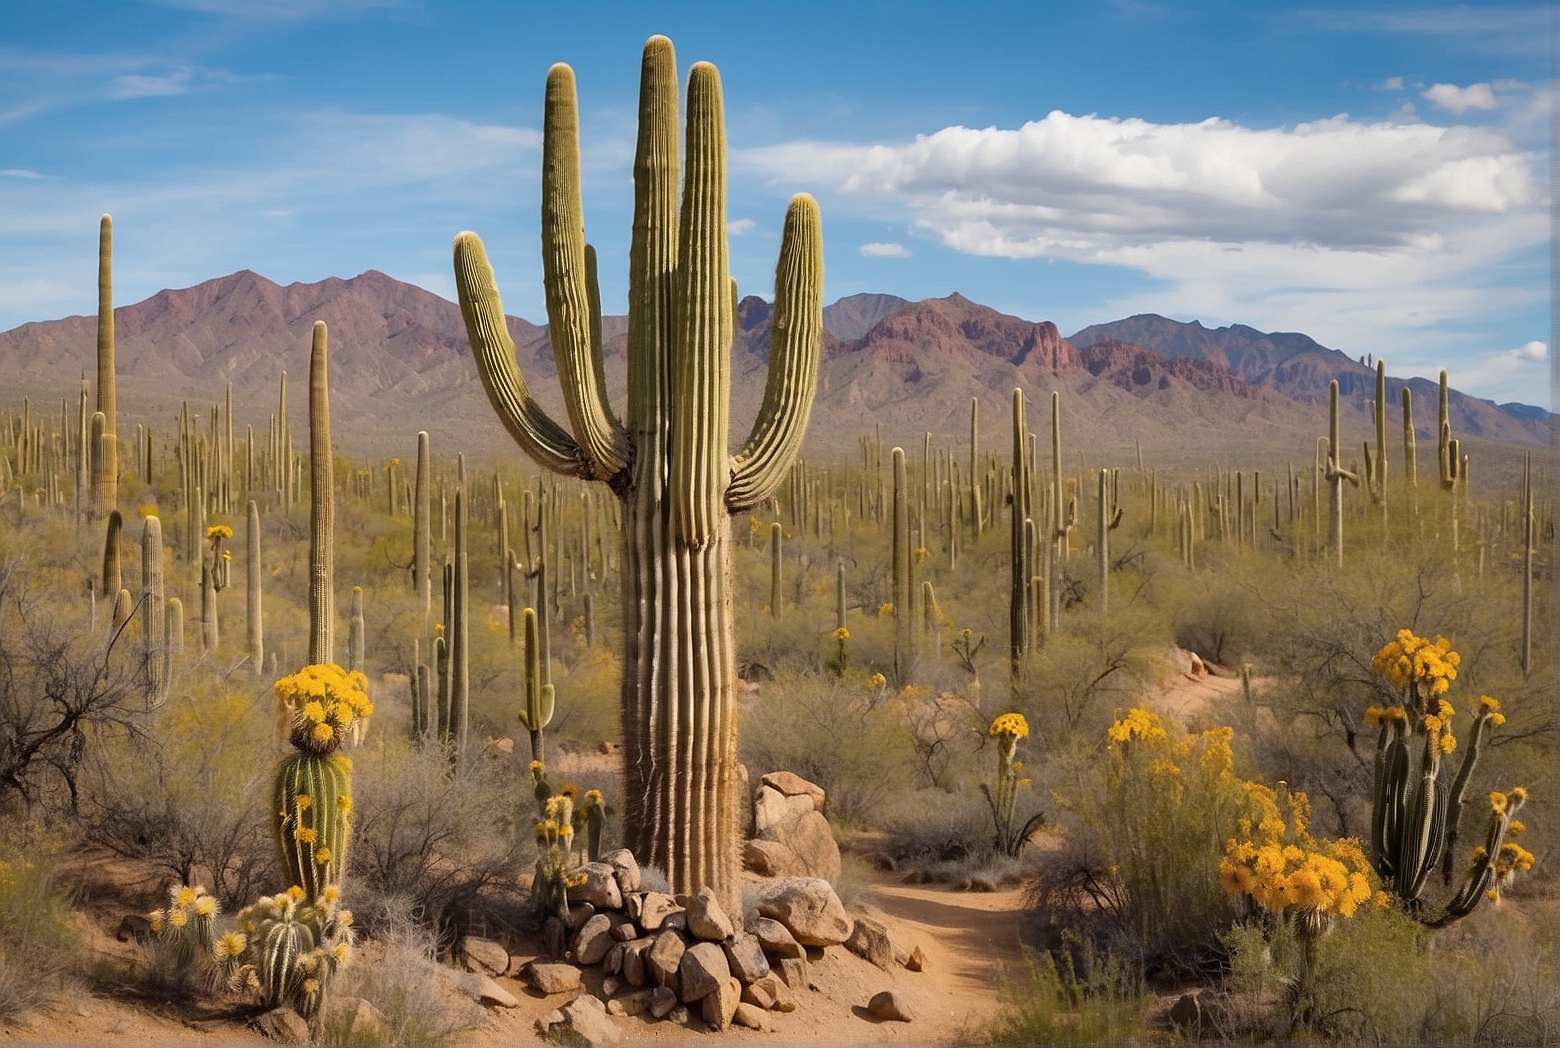 An Overview of Saguaro Cactus Types